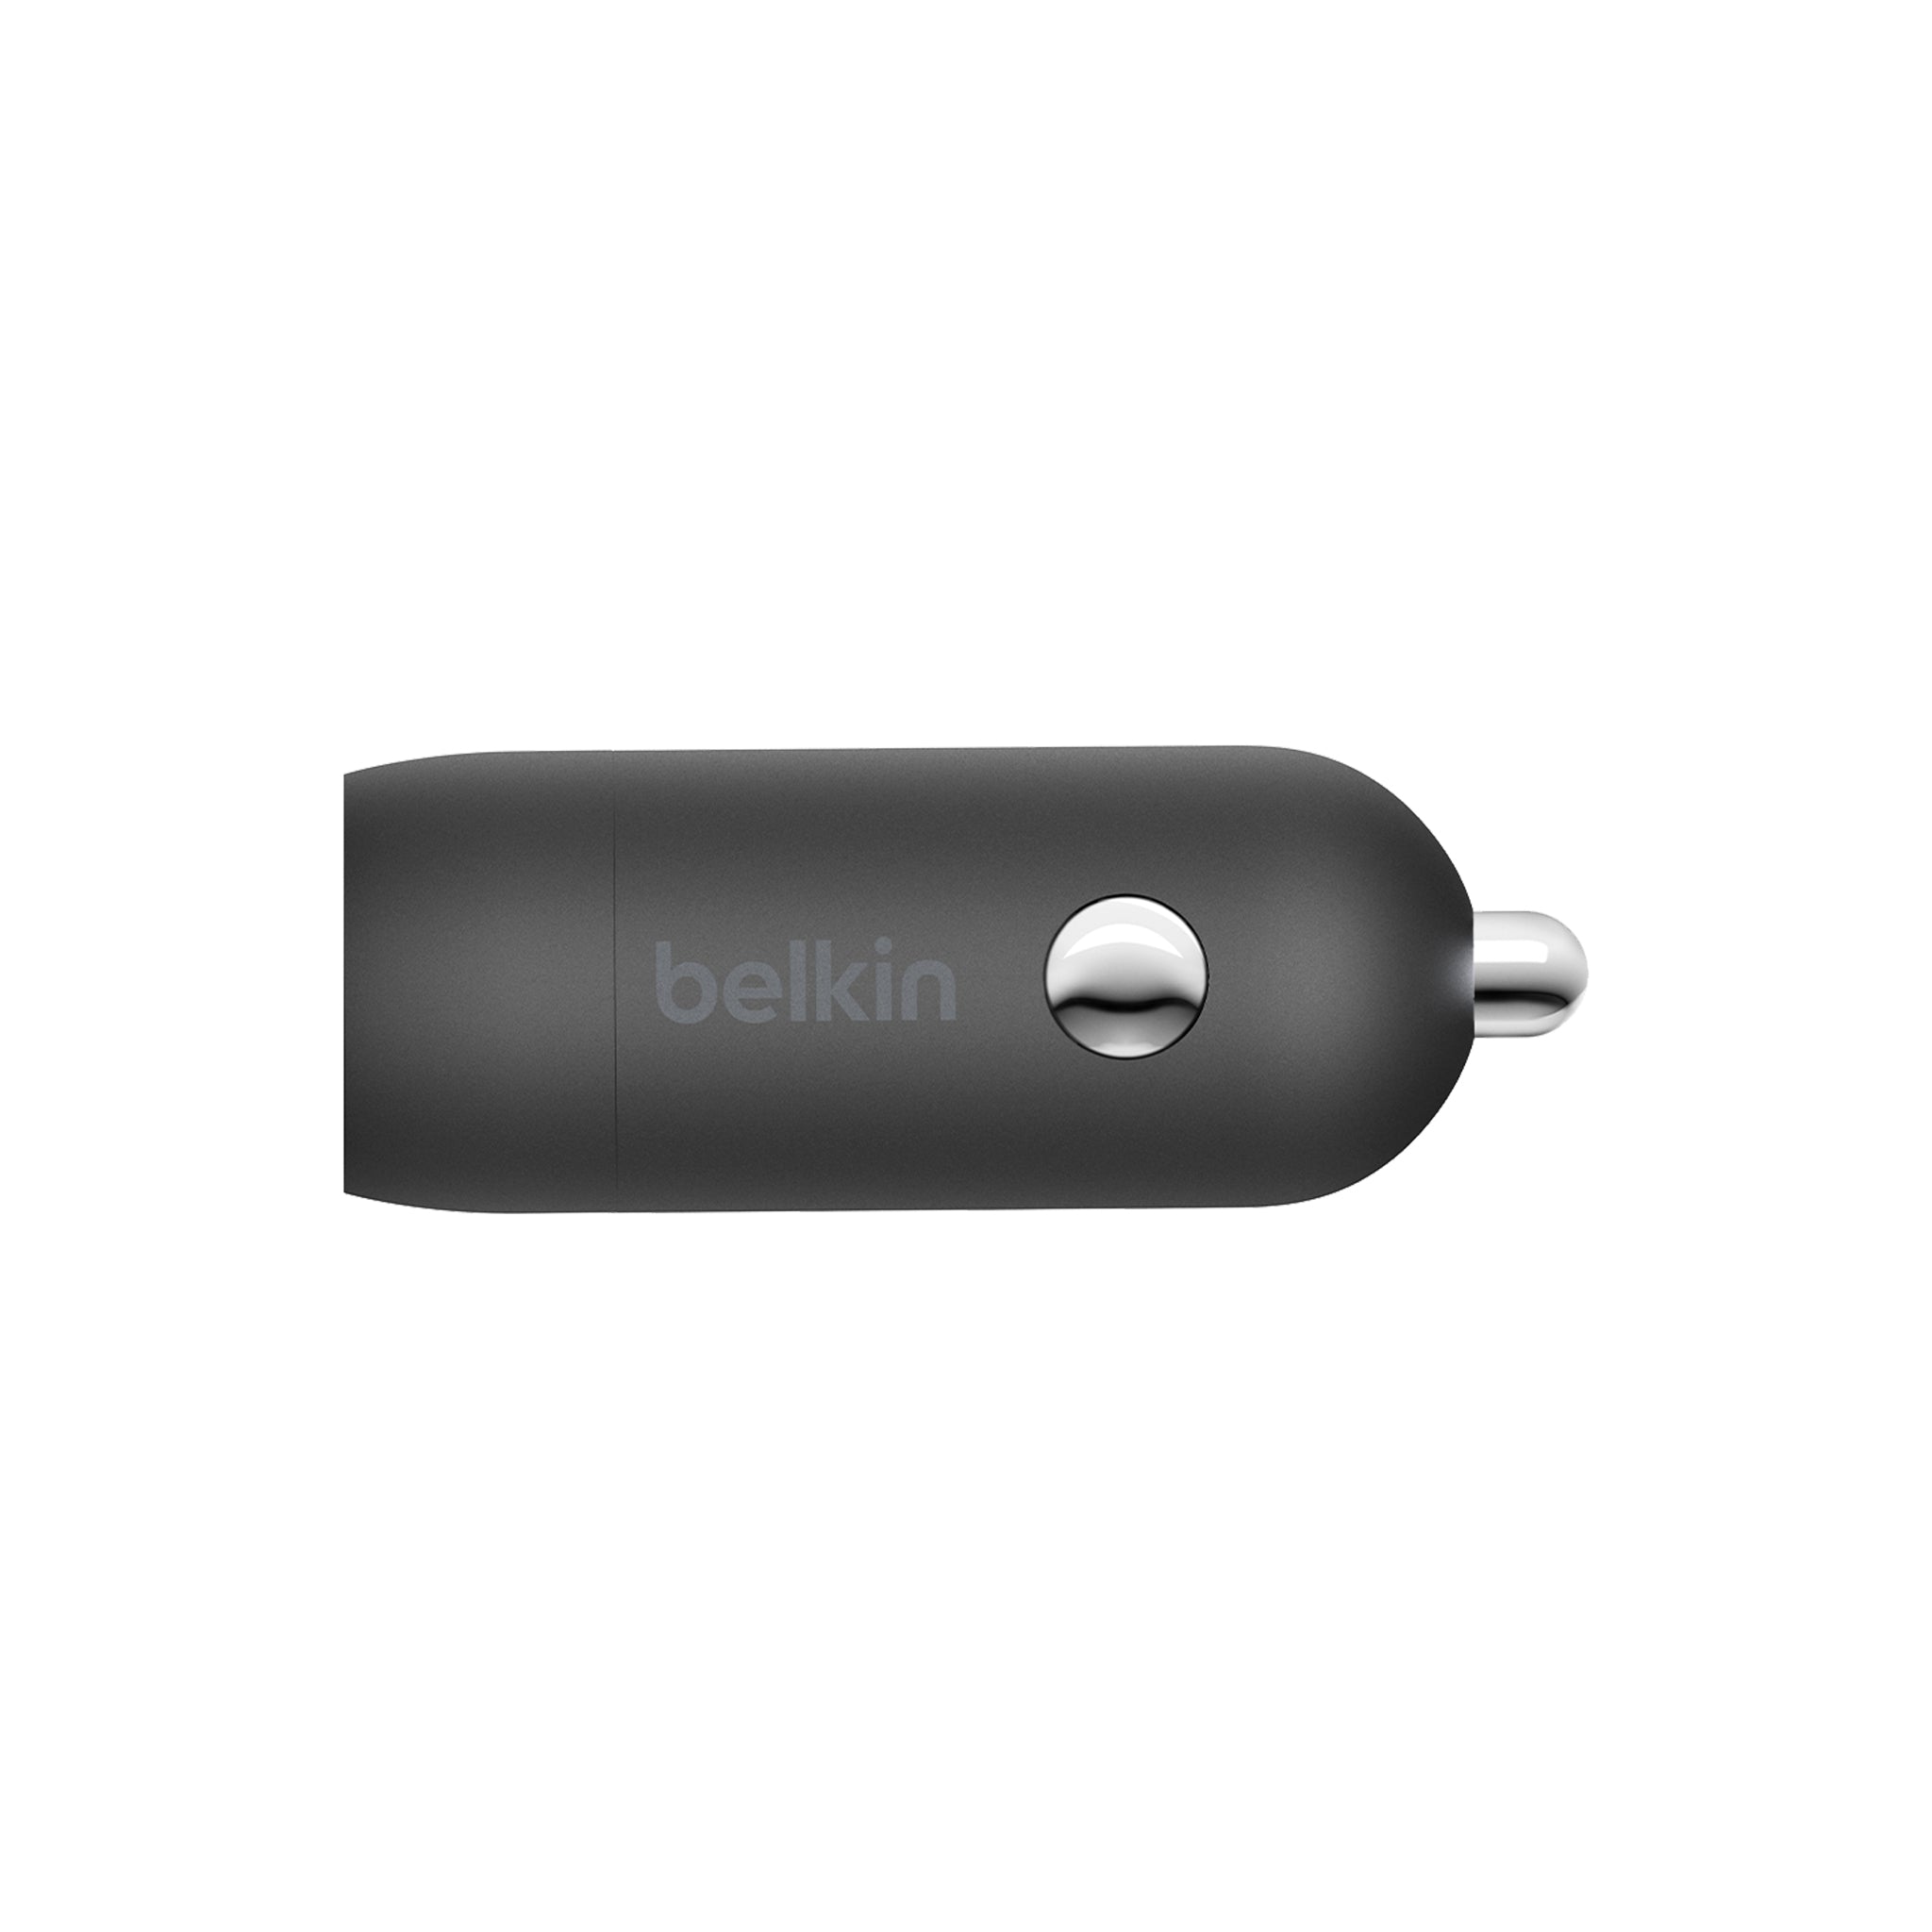 Belkin - Boost Up Usb C Car Charger 18w / 3.6a With Usb C To Apple Lightning Cable 4ft - Black